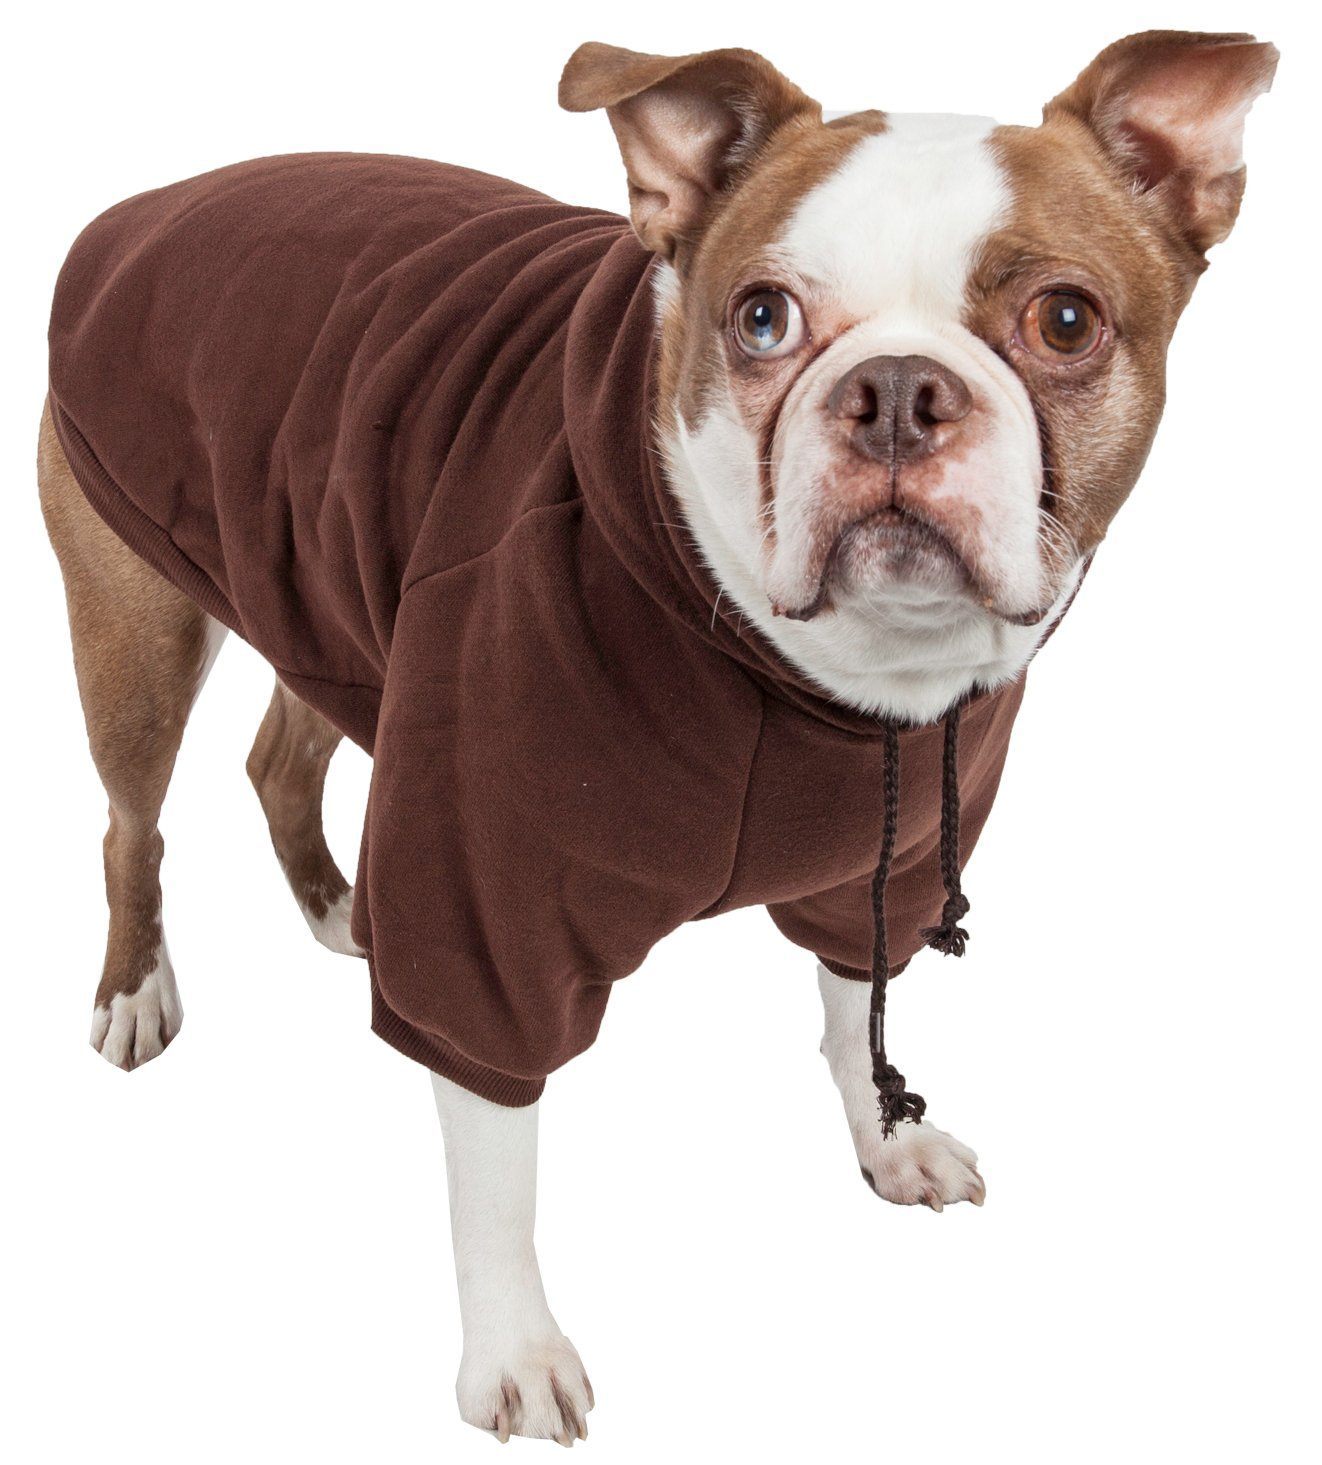 Pet Life ® 'American Classic' Fashion Plush Cotton Hooded Dog Sweater X-Small Brown